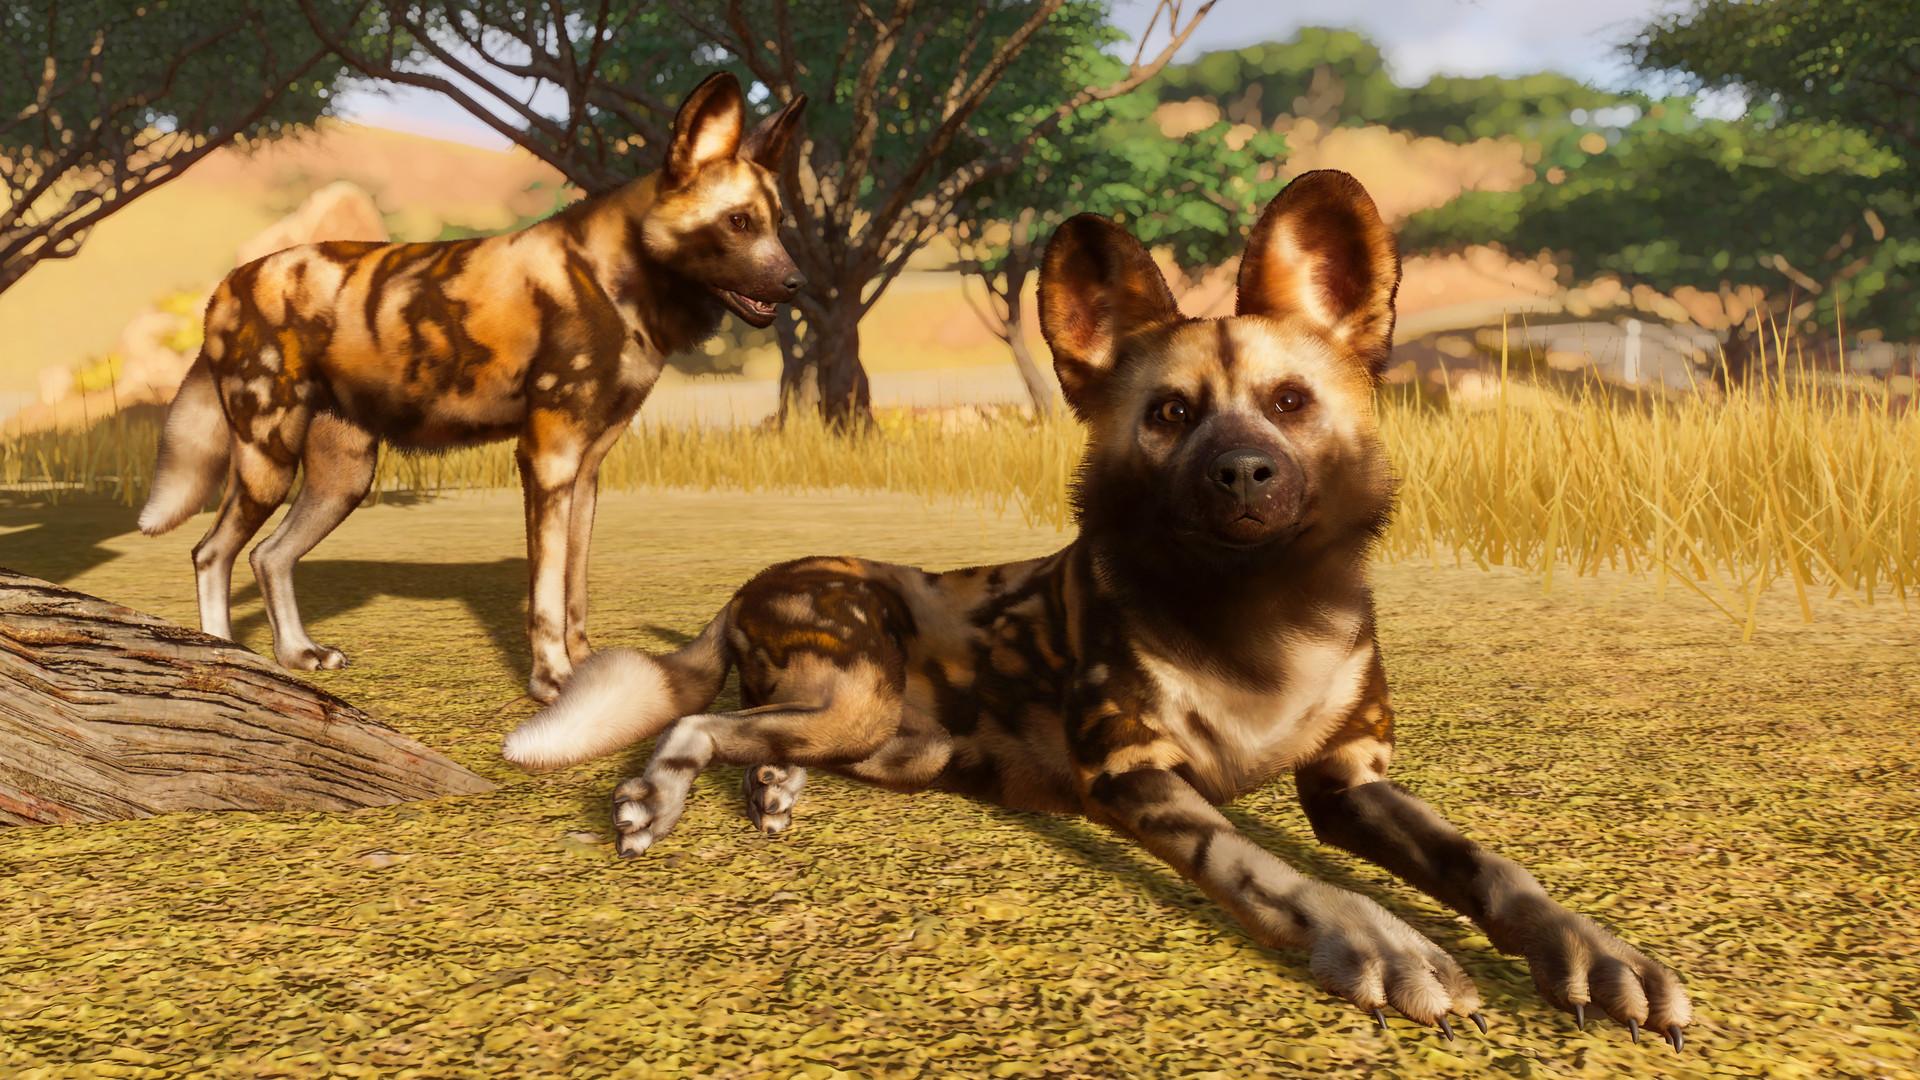 NEW HD PLANET ZOO OFFICIAL IMAGES (NEW ANIMALS)